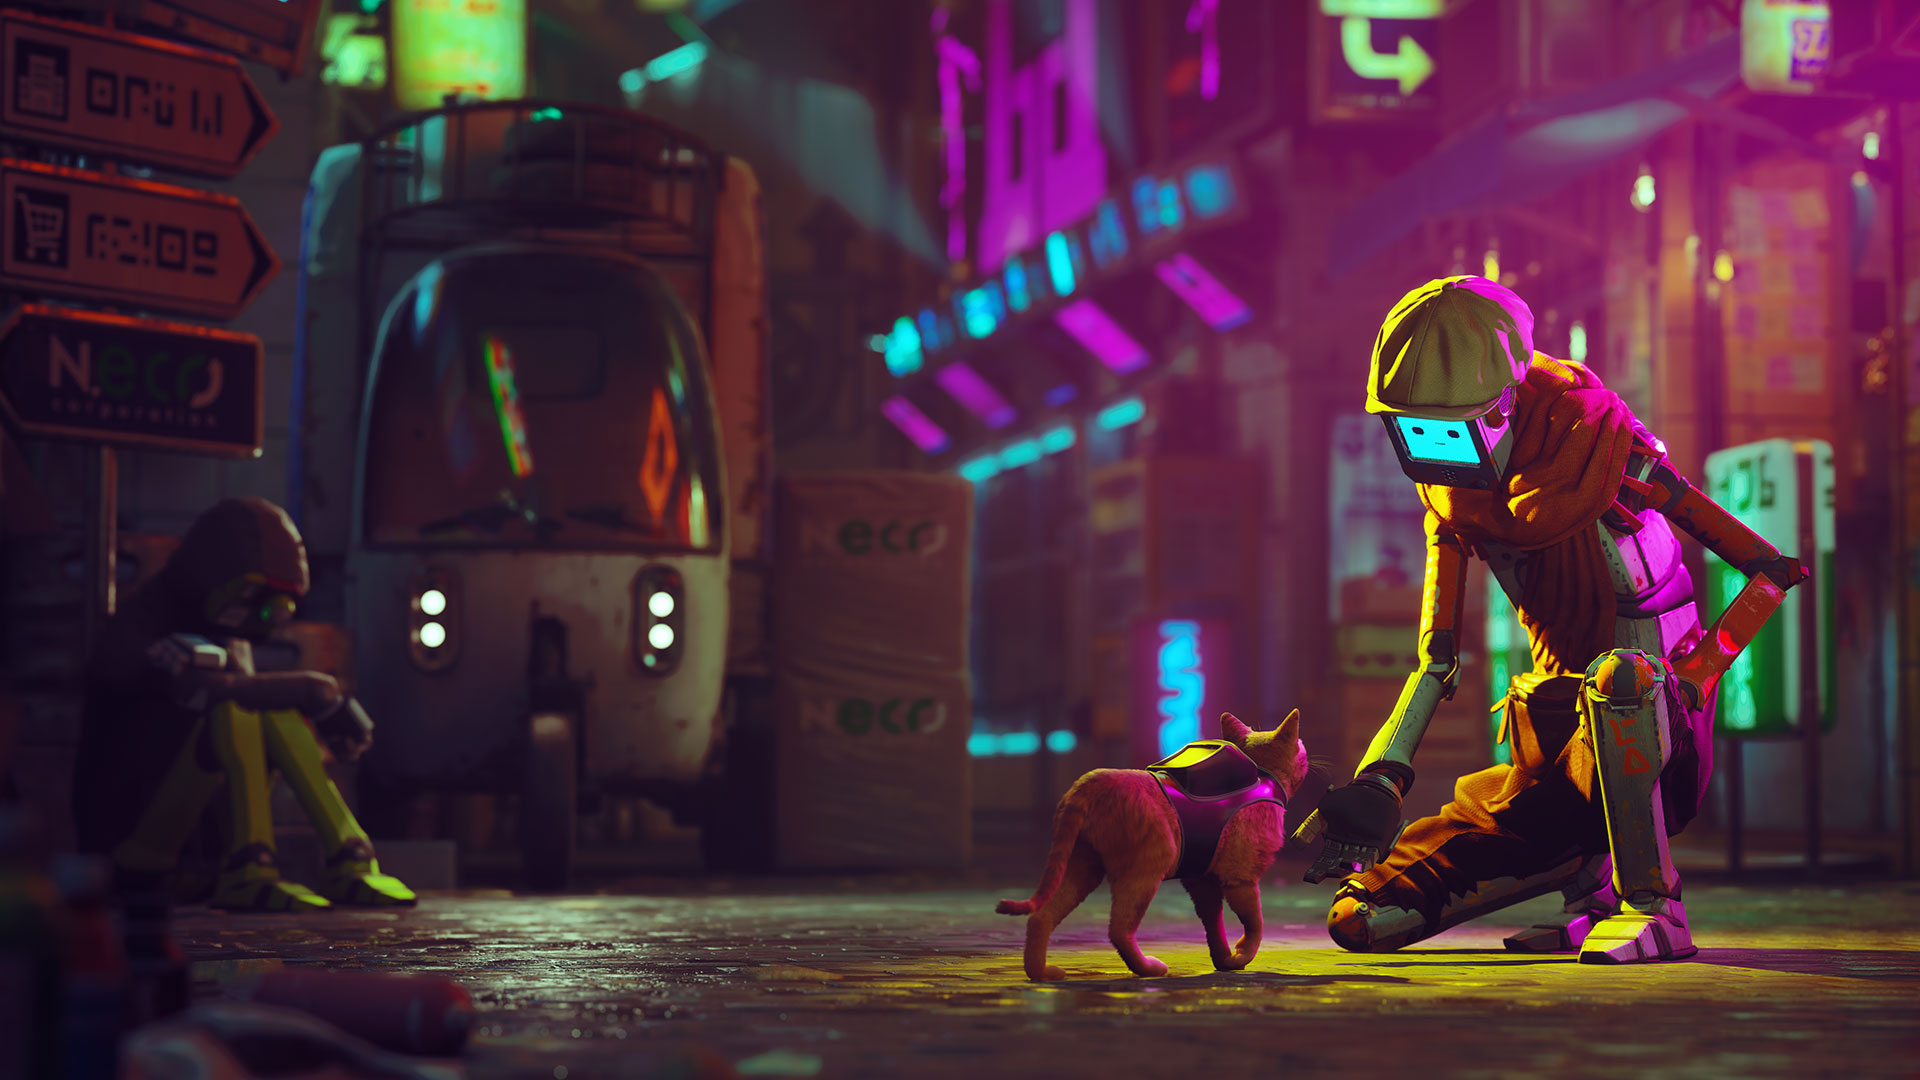 Screenshot from Stray, the game about a lost cat